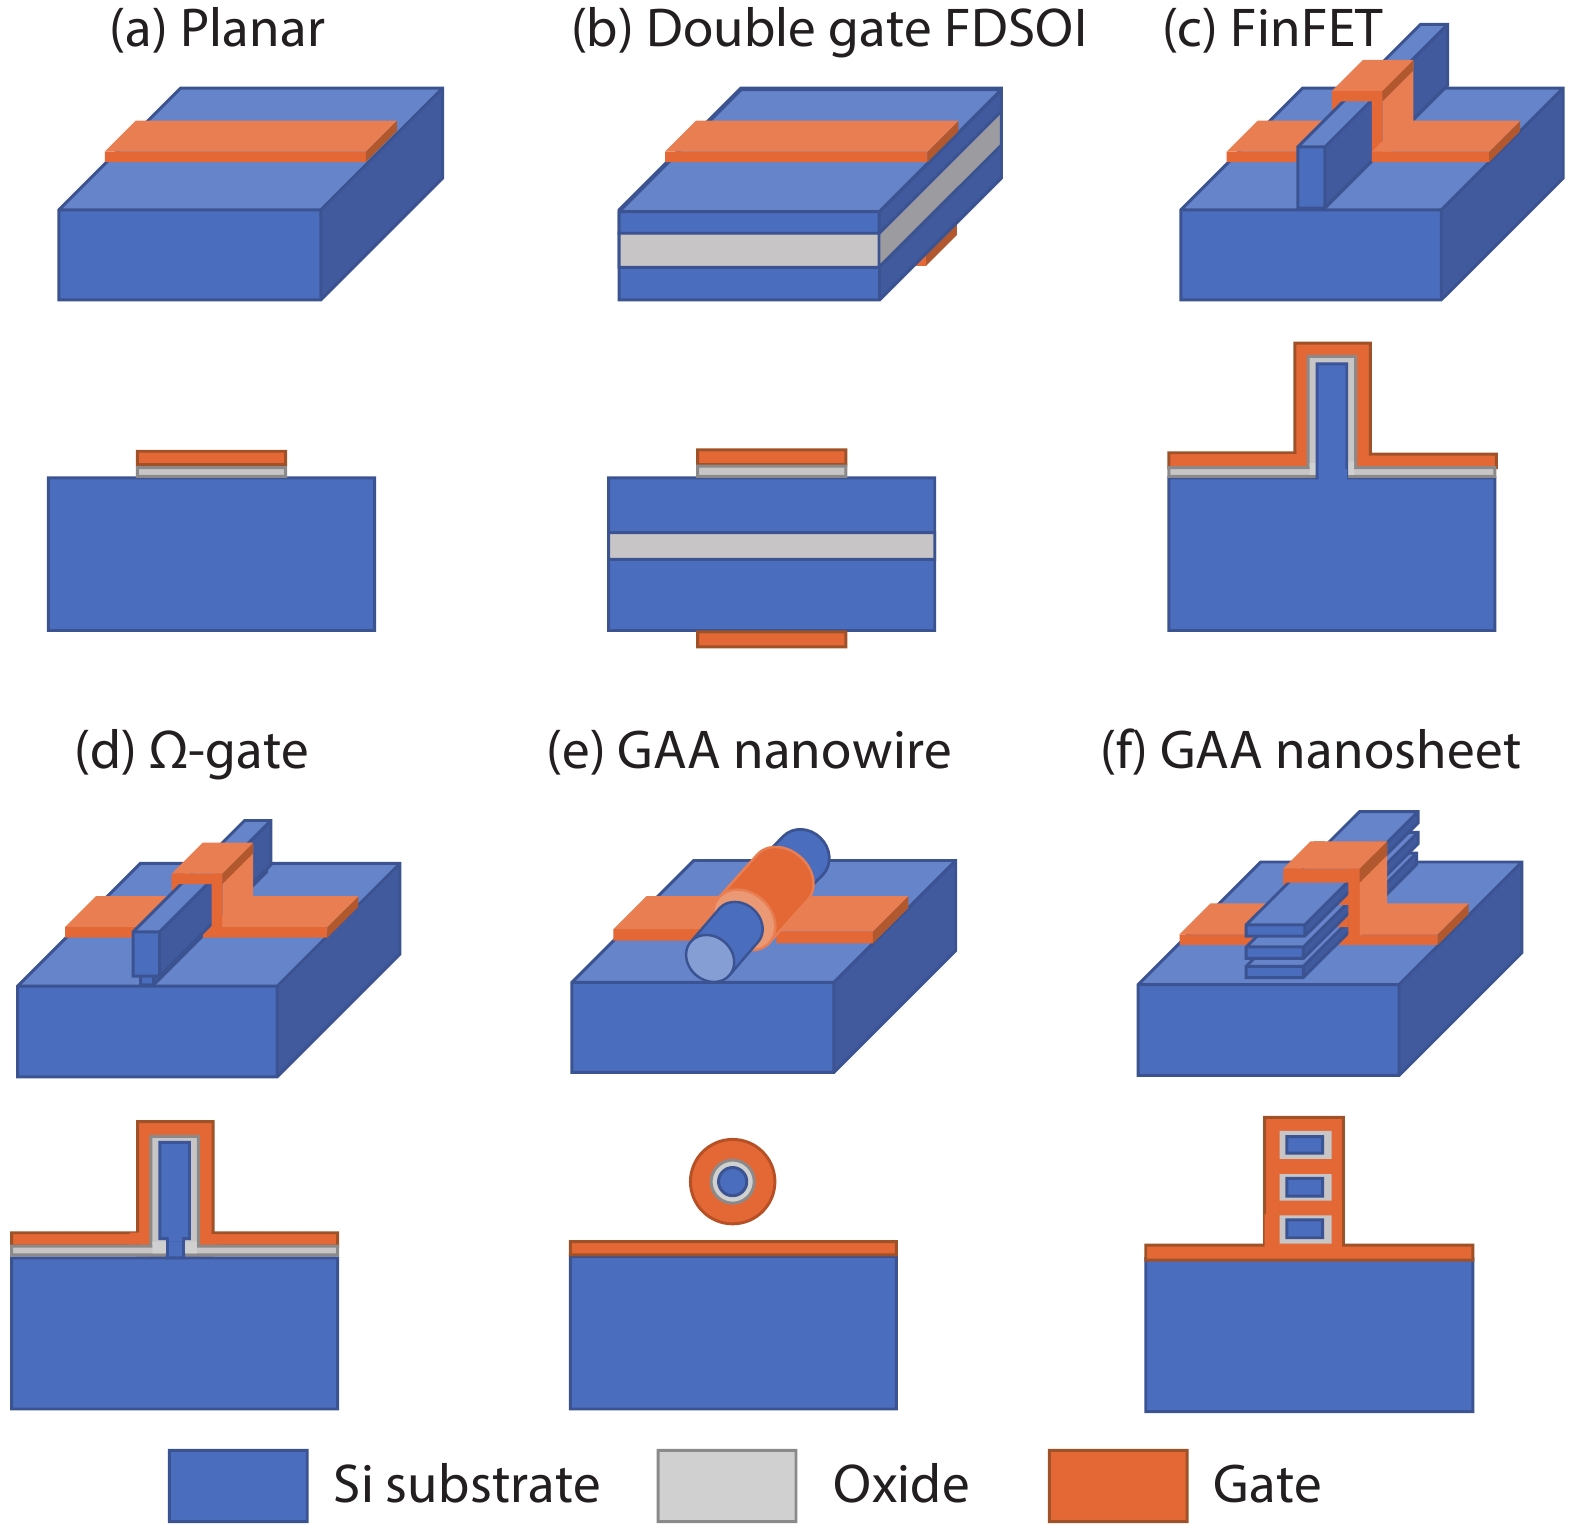 (Color online) Evolution of MuGFETs from the planar device to the stacking structures. (a) Planar MOSFET. (b) Double-gate (DG) fully depleted SOI MOSFET. (c) FinFET. (d) Ω-gate MOSFET. (e) GAA NW MOSFET. (f) GAA multilayer nanosheet MOSFET.